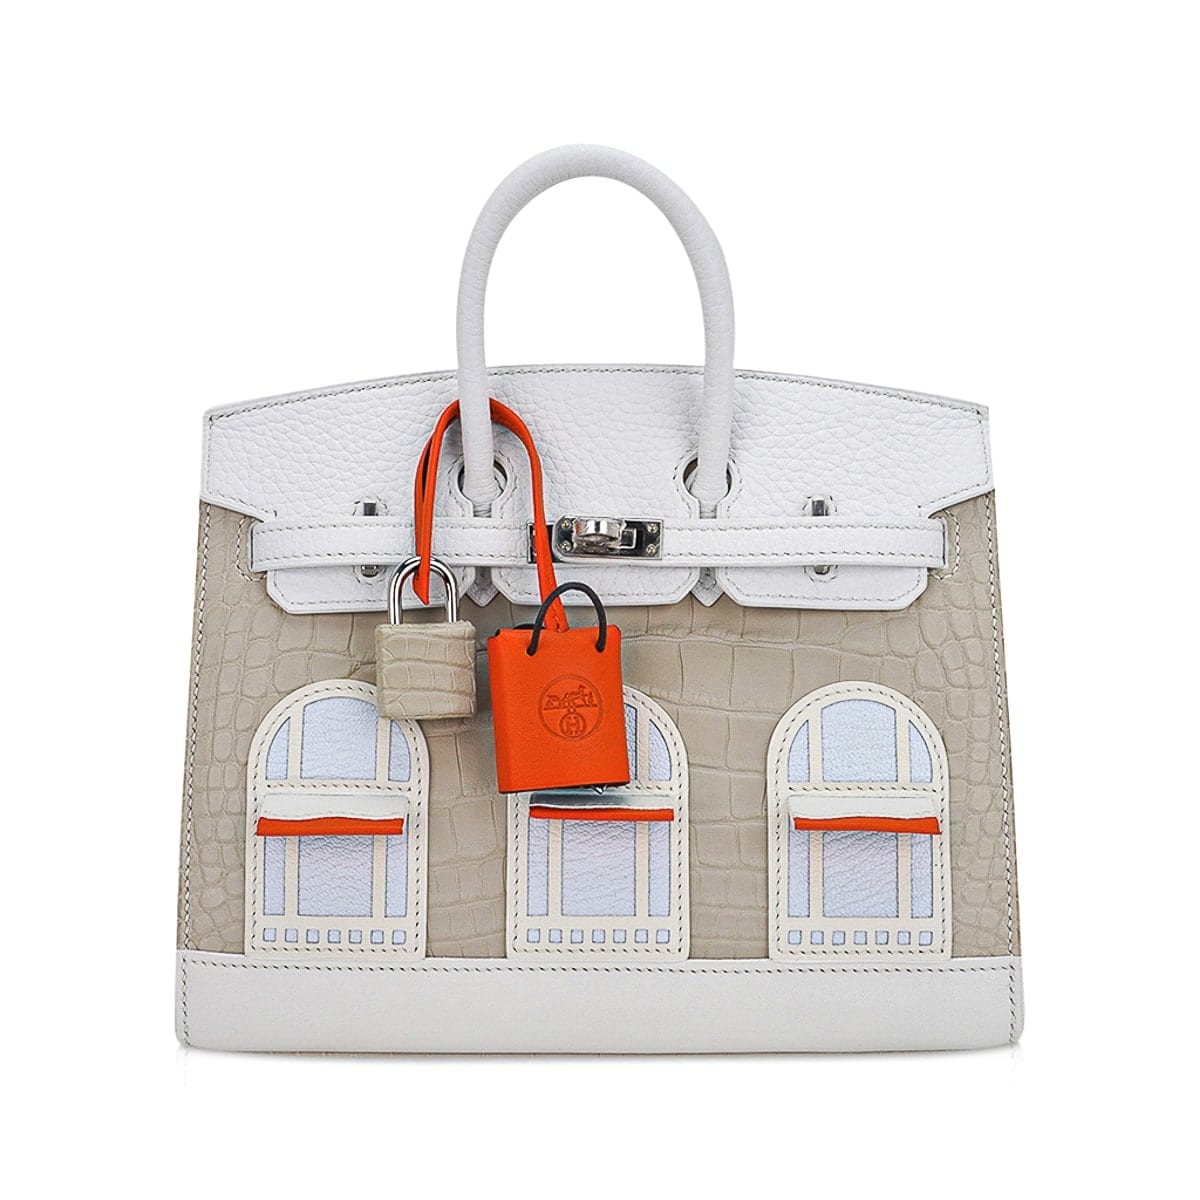 Hermes Limited Edition Birkin 20 Sellier Bag Neige (Snow) White Faubourg  House Matte Alligator